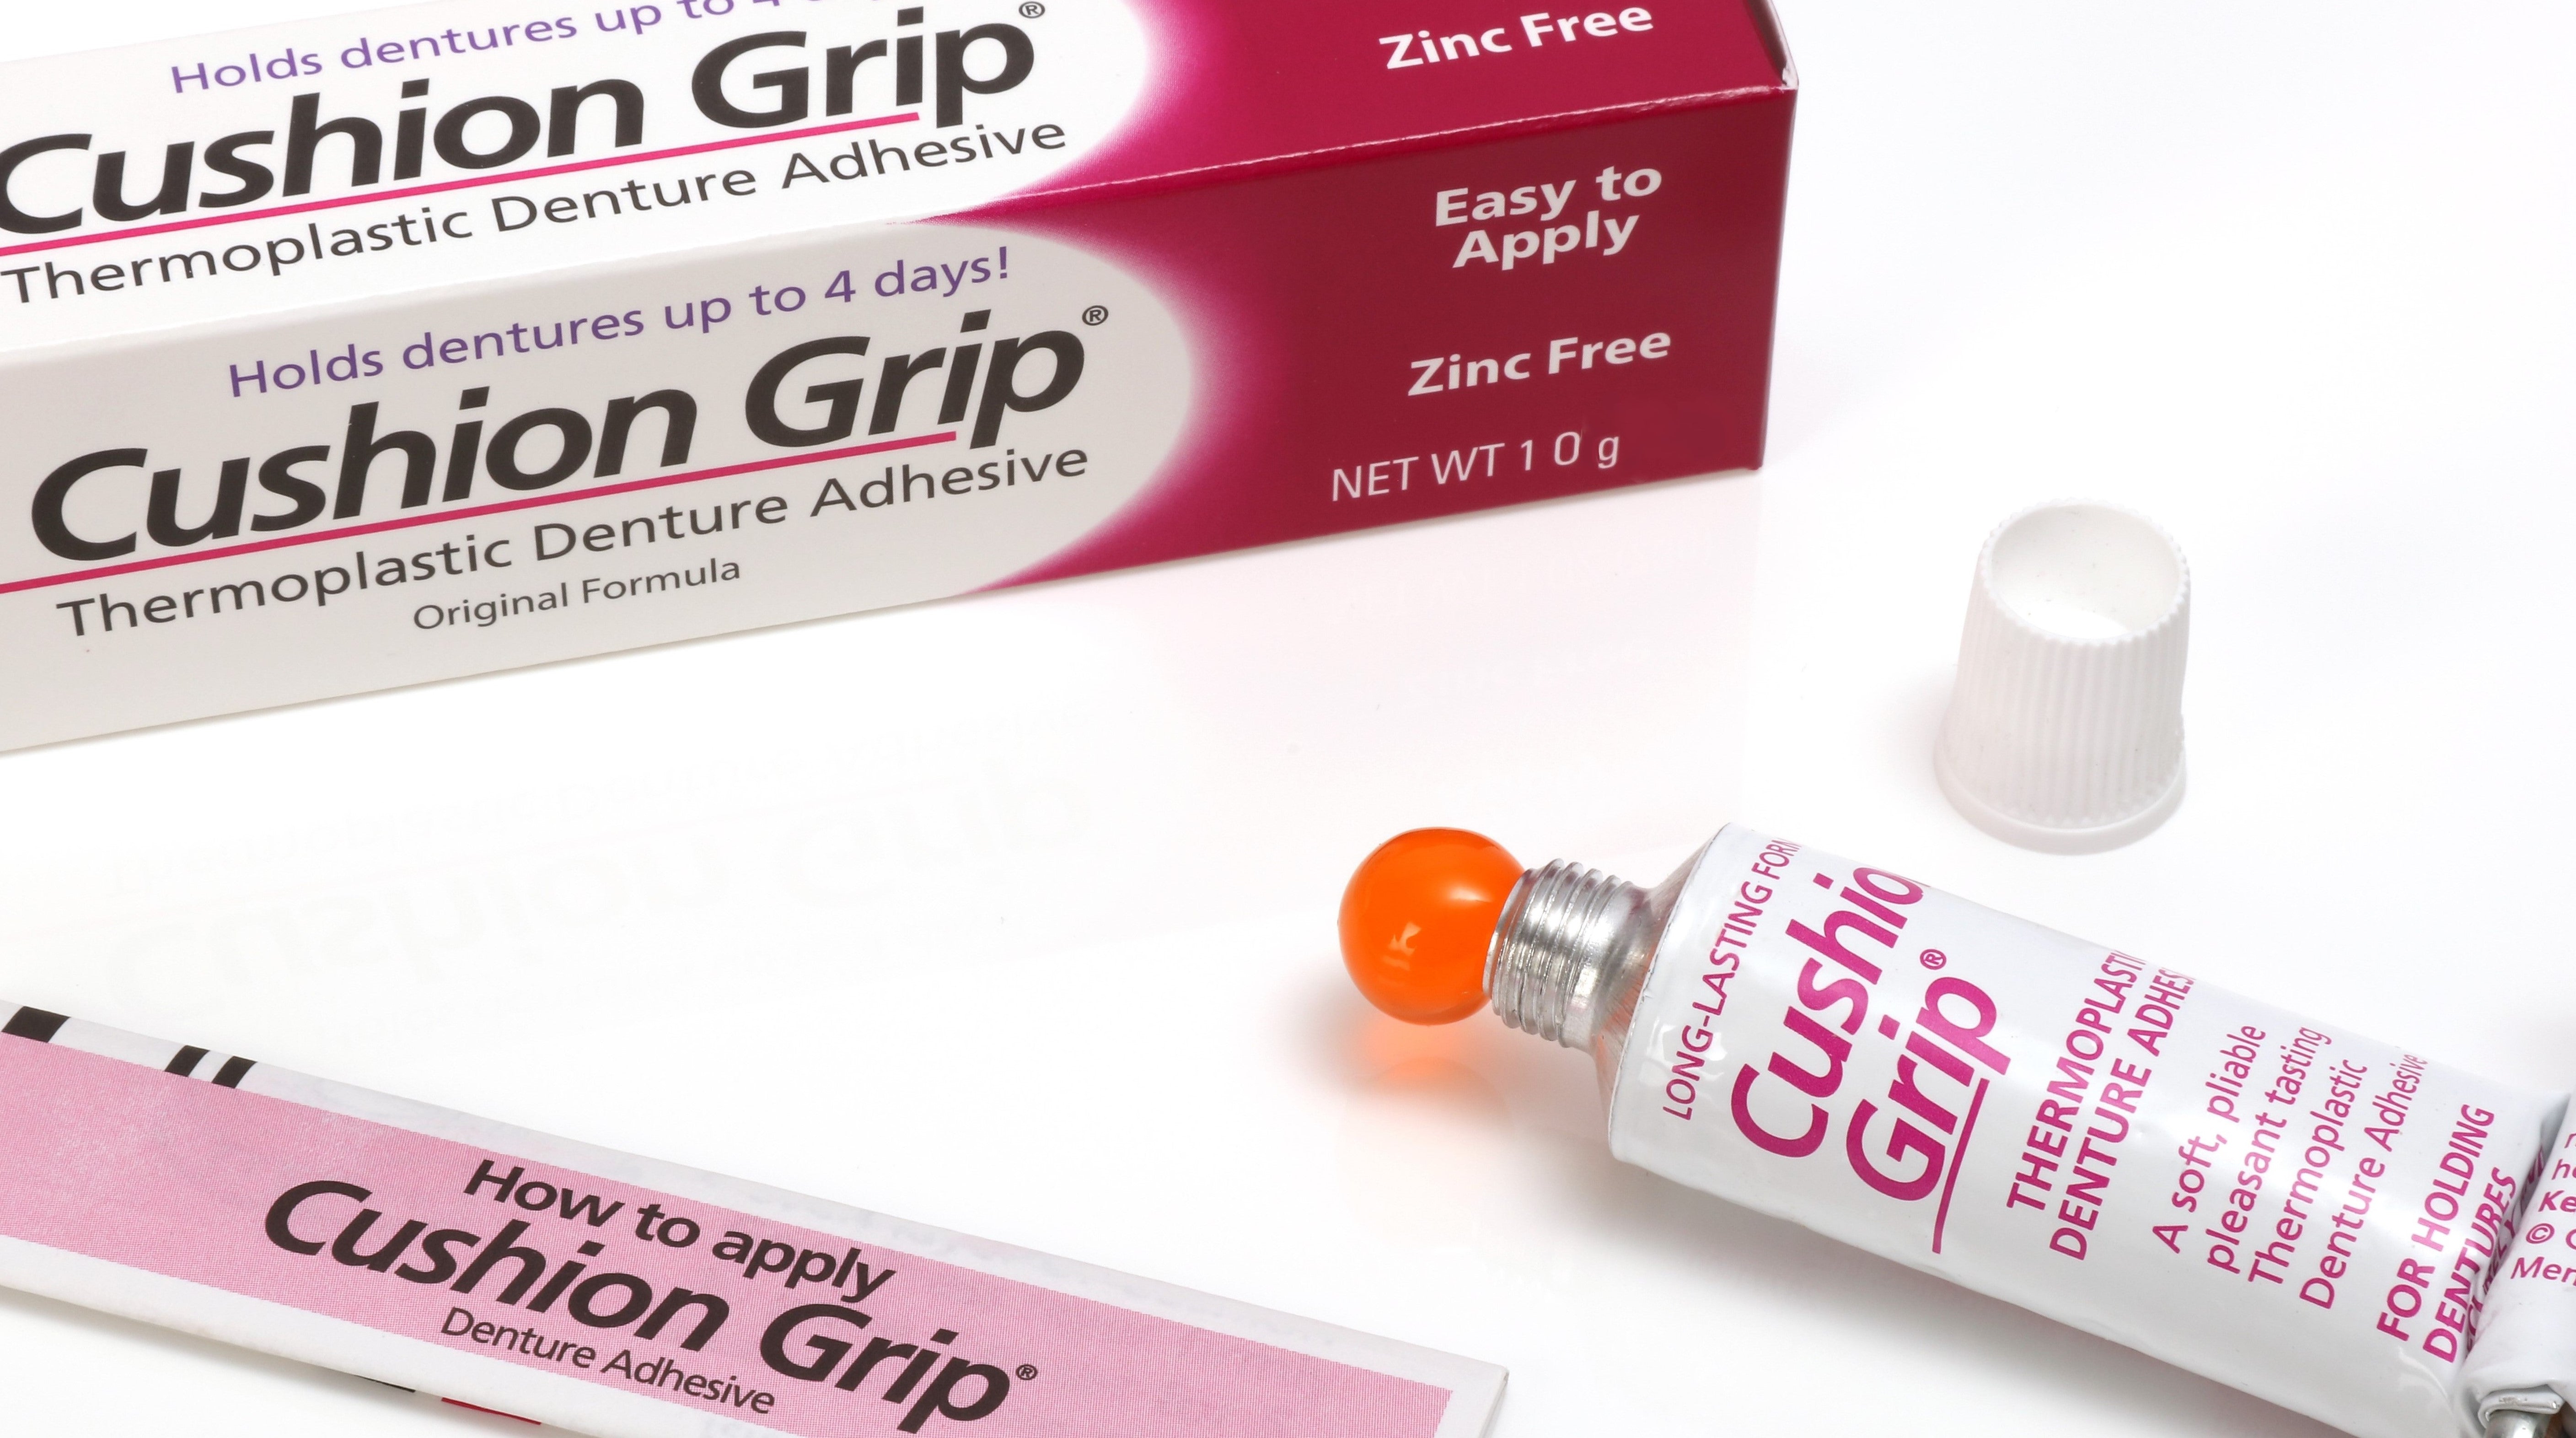 The Cushion Grip Denture Adhesive combines a soft liner and a mild adhesive.